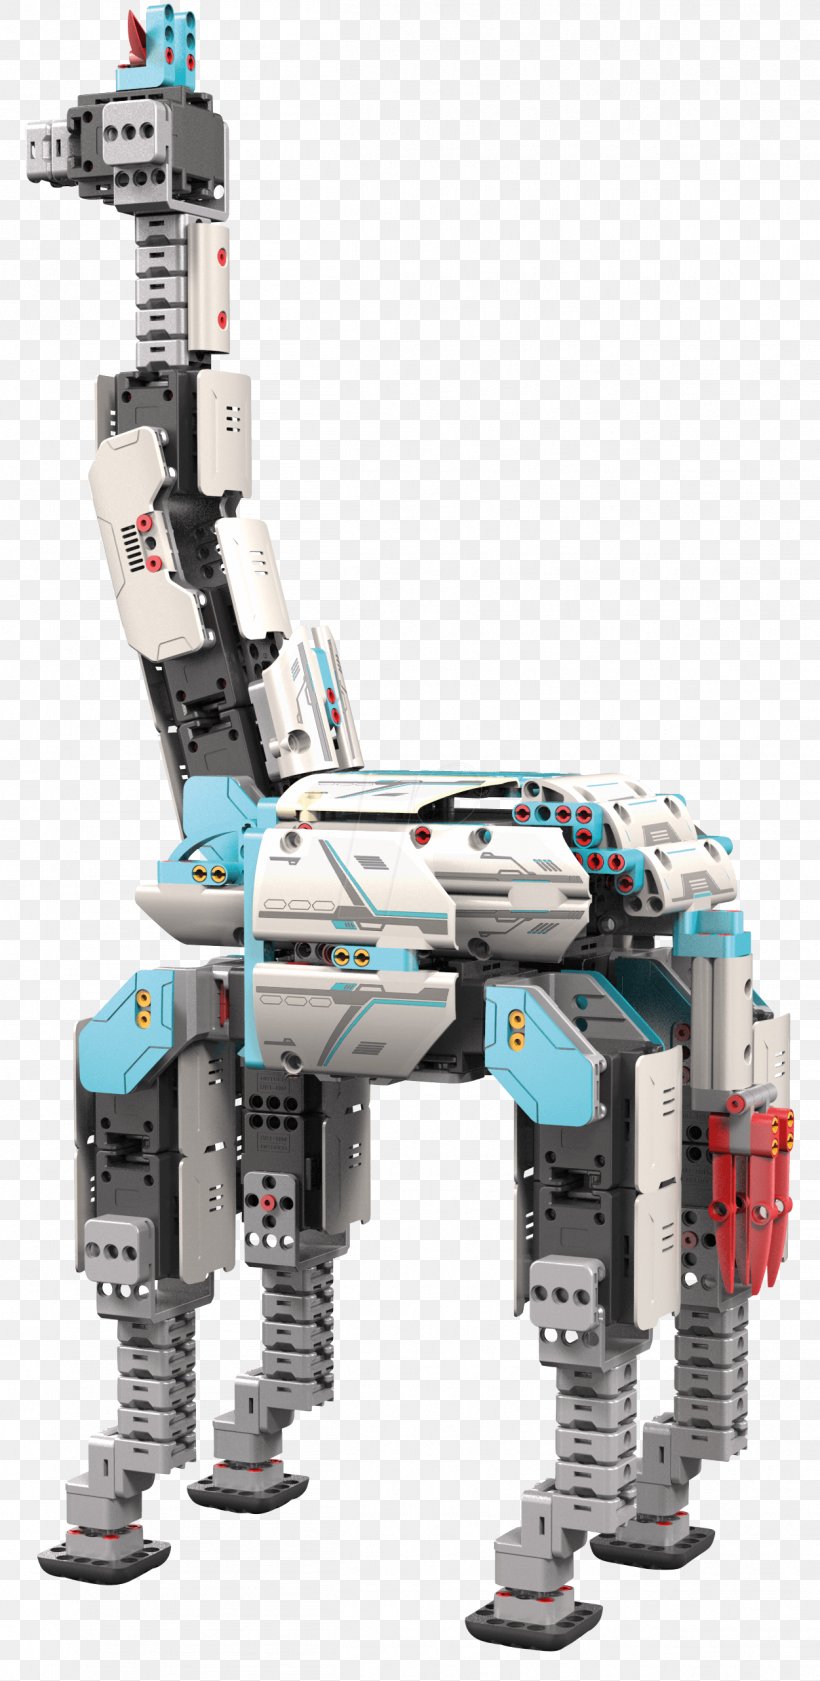 Robot Kit Robotics Invention Technology, PNG, 1251x2566px, Robot, Engineering, Humanoid, Humanoid Robot, Invention Download Free